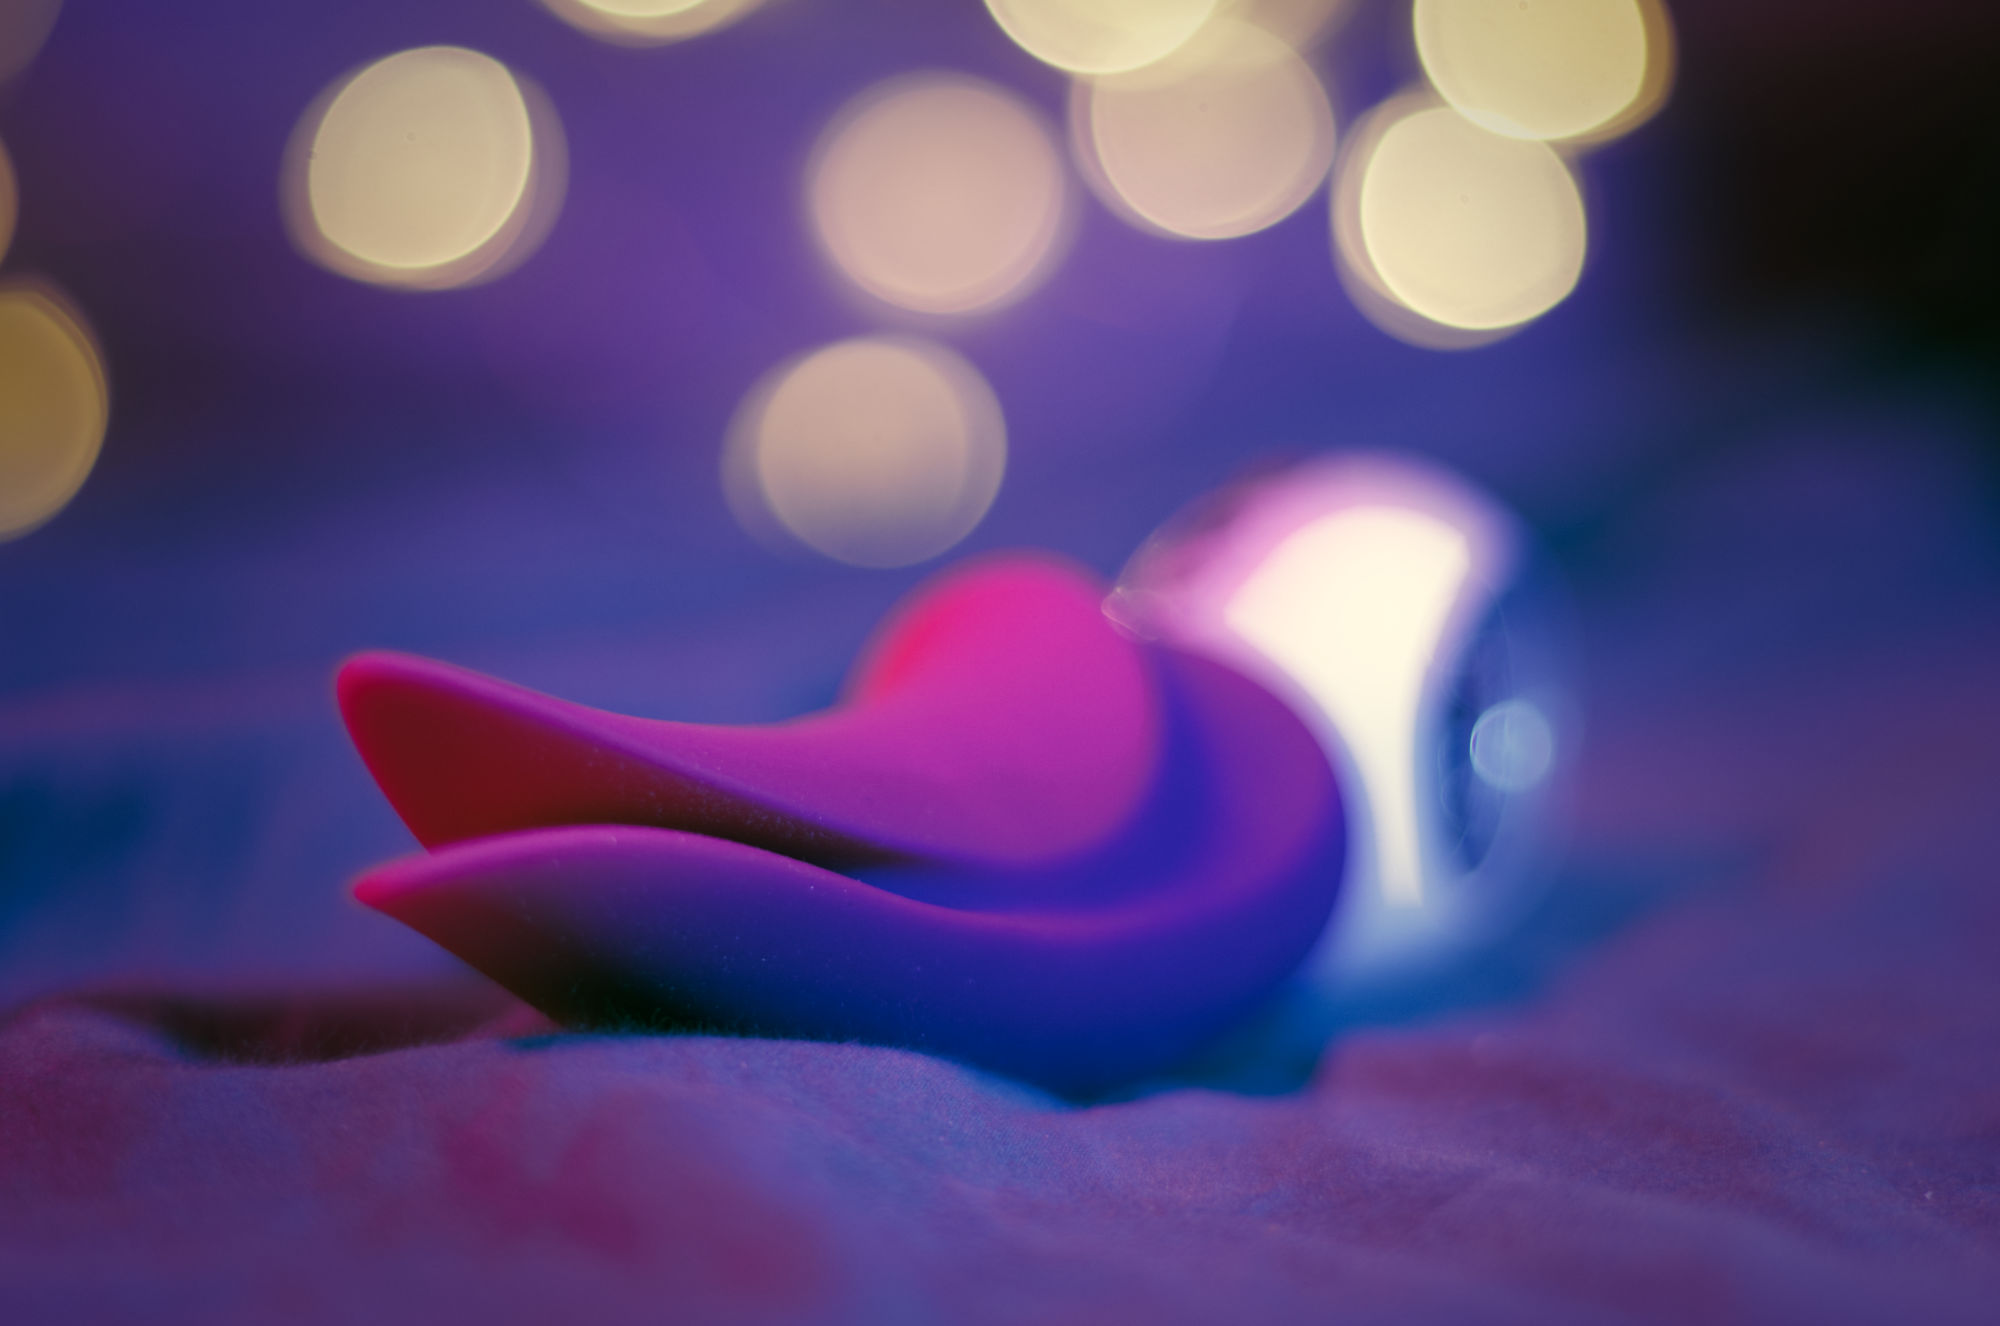 Front view of the Volta, a purple vibrator with a tapered silicone body that ends in a spit tongue-like pieces. Very blurry background with purple/blue lighting and christmas lights